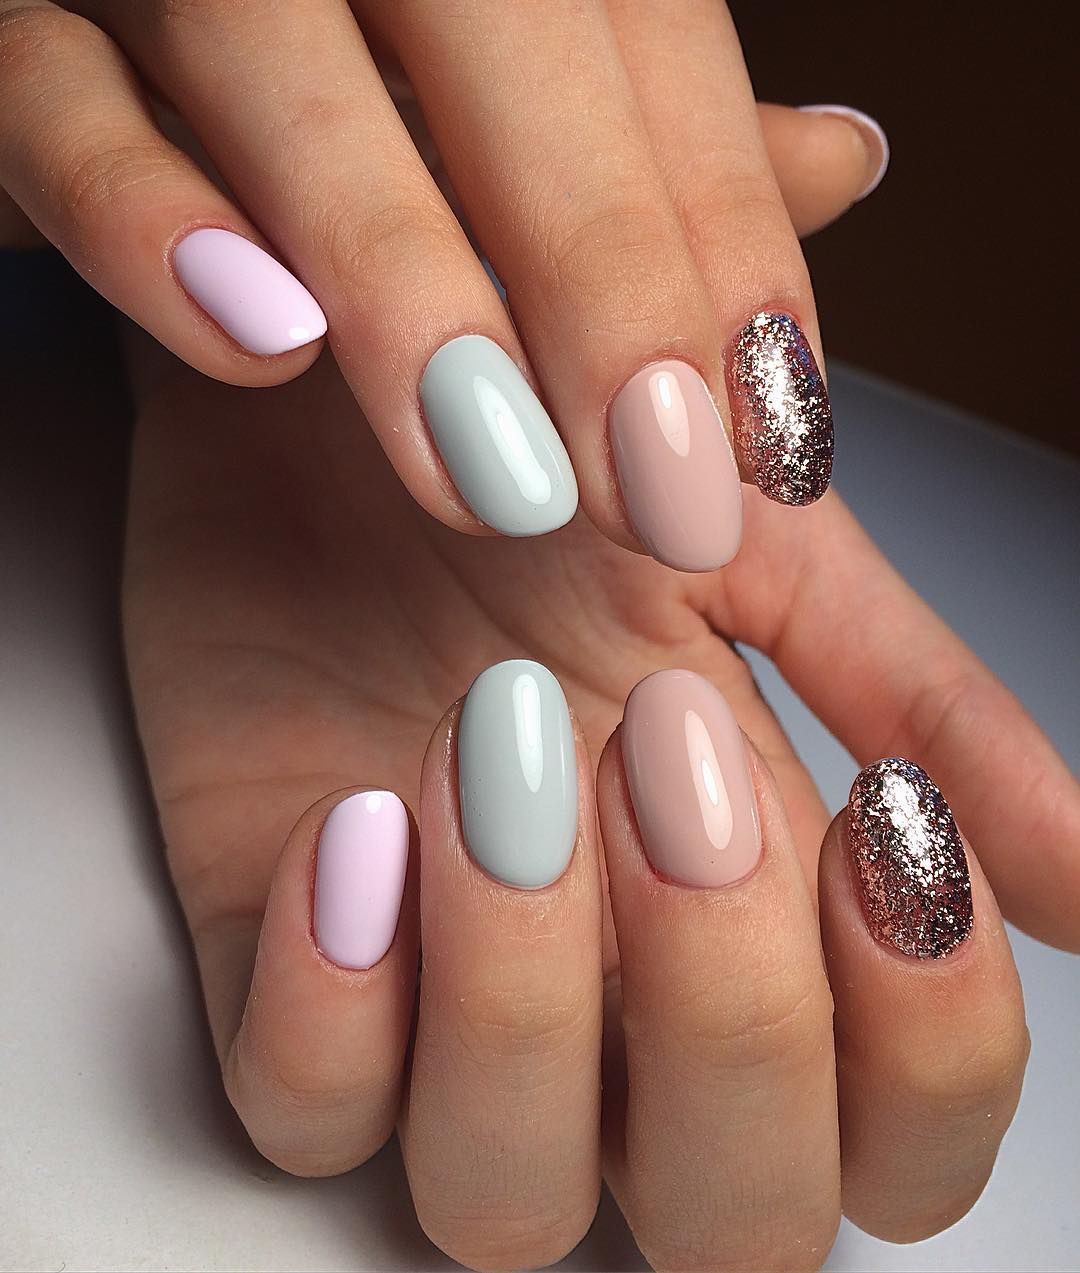 nails oval1